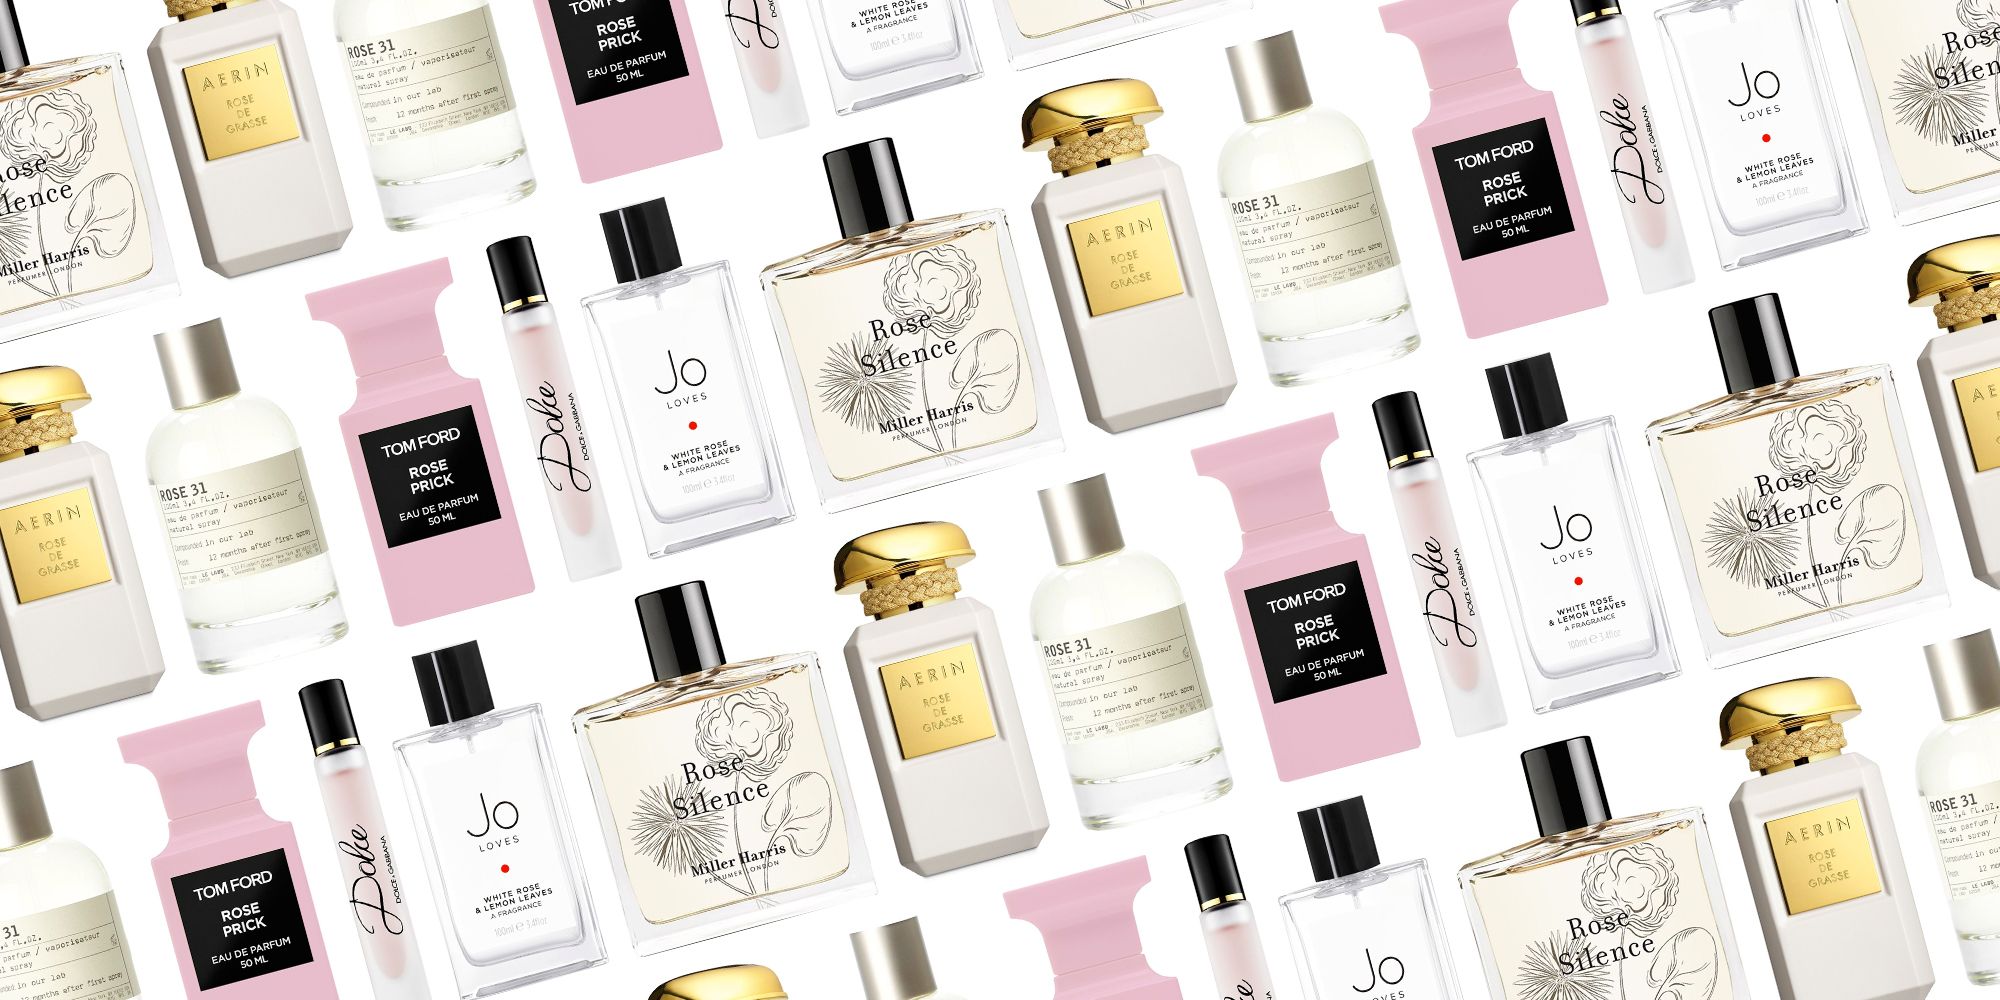 15 Best French Perfume Brands